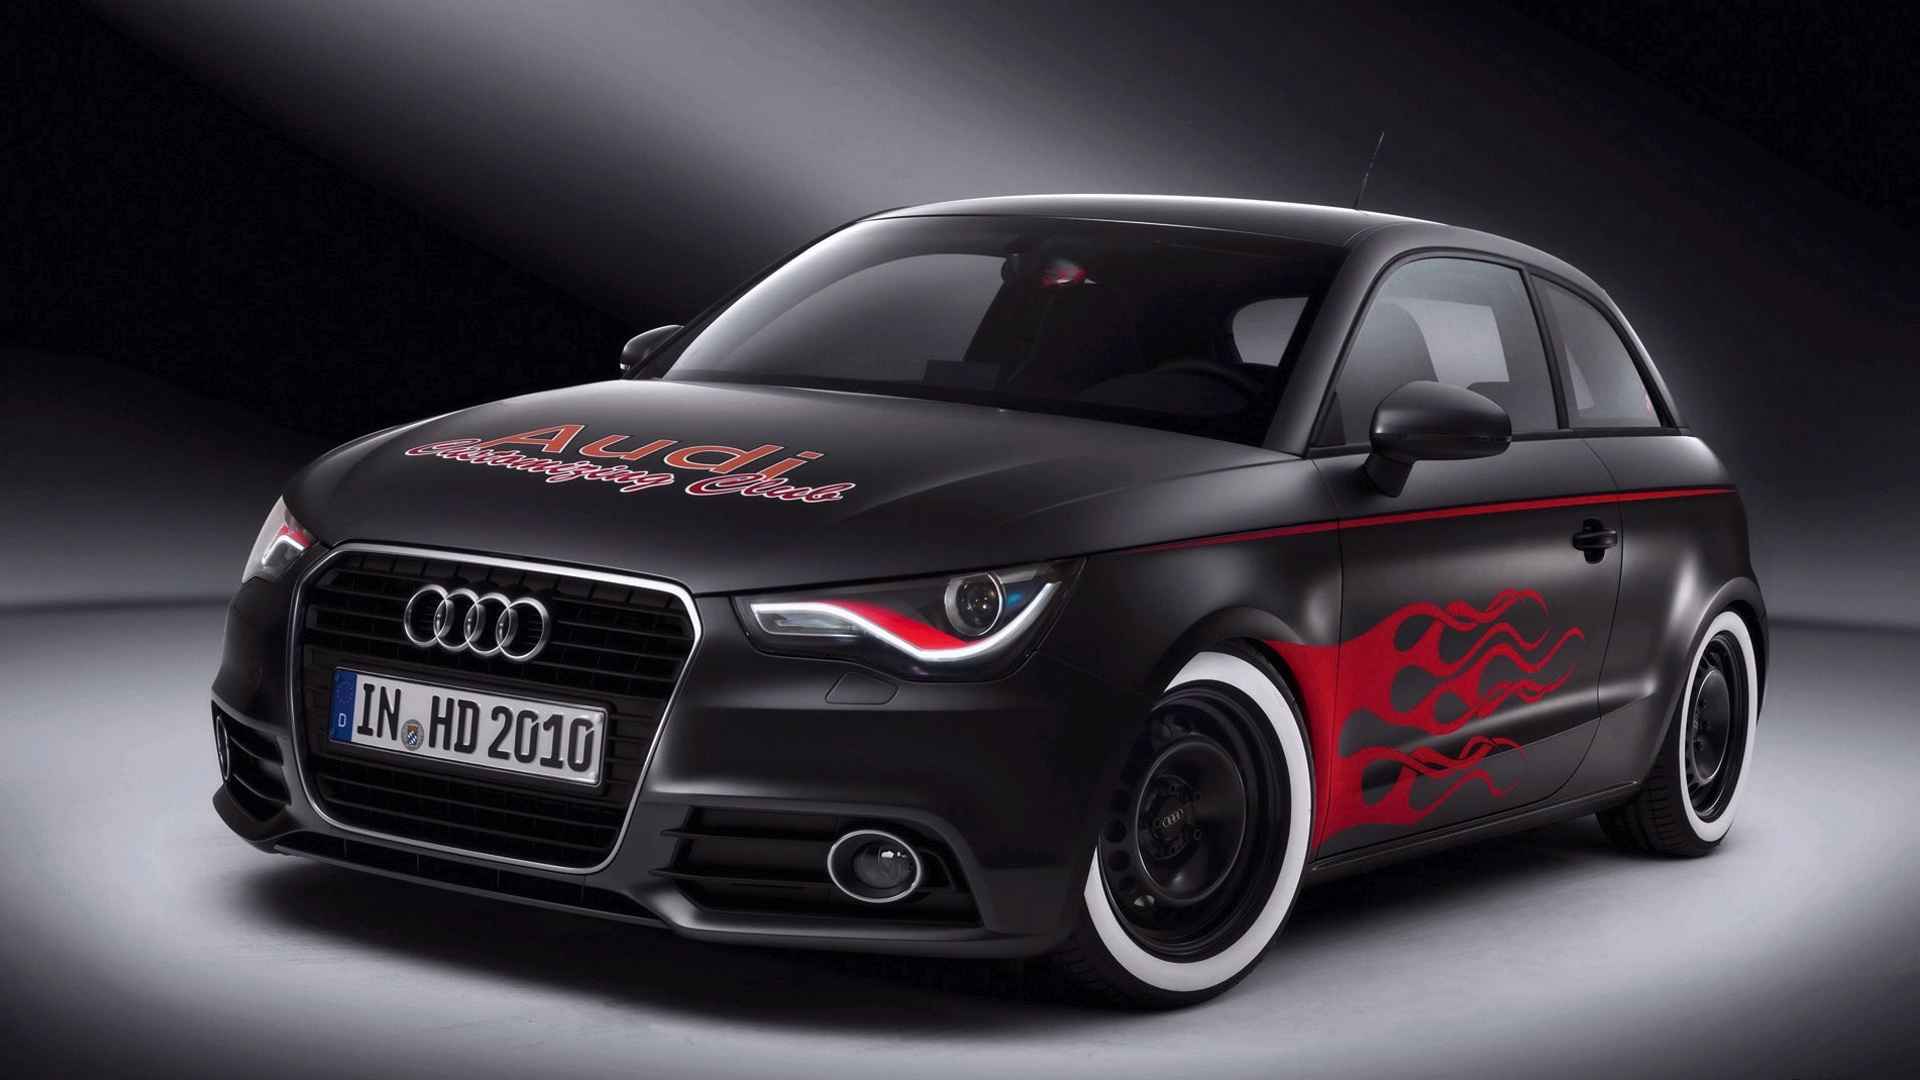 hd images of audi cars